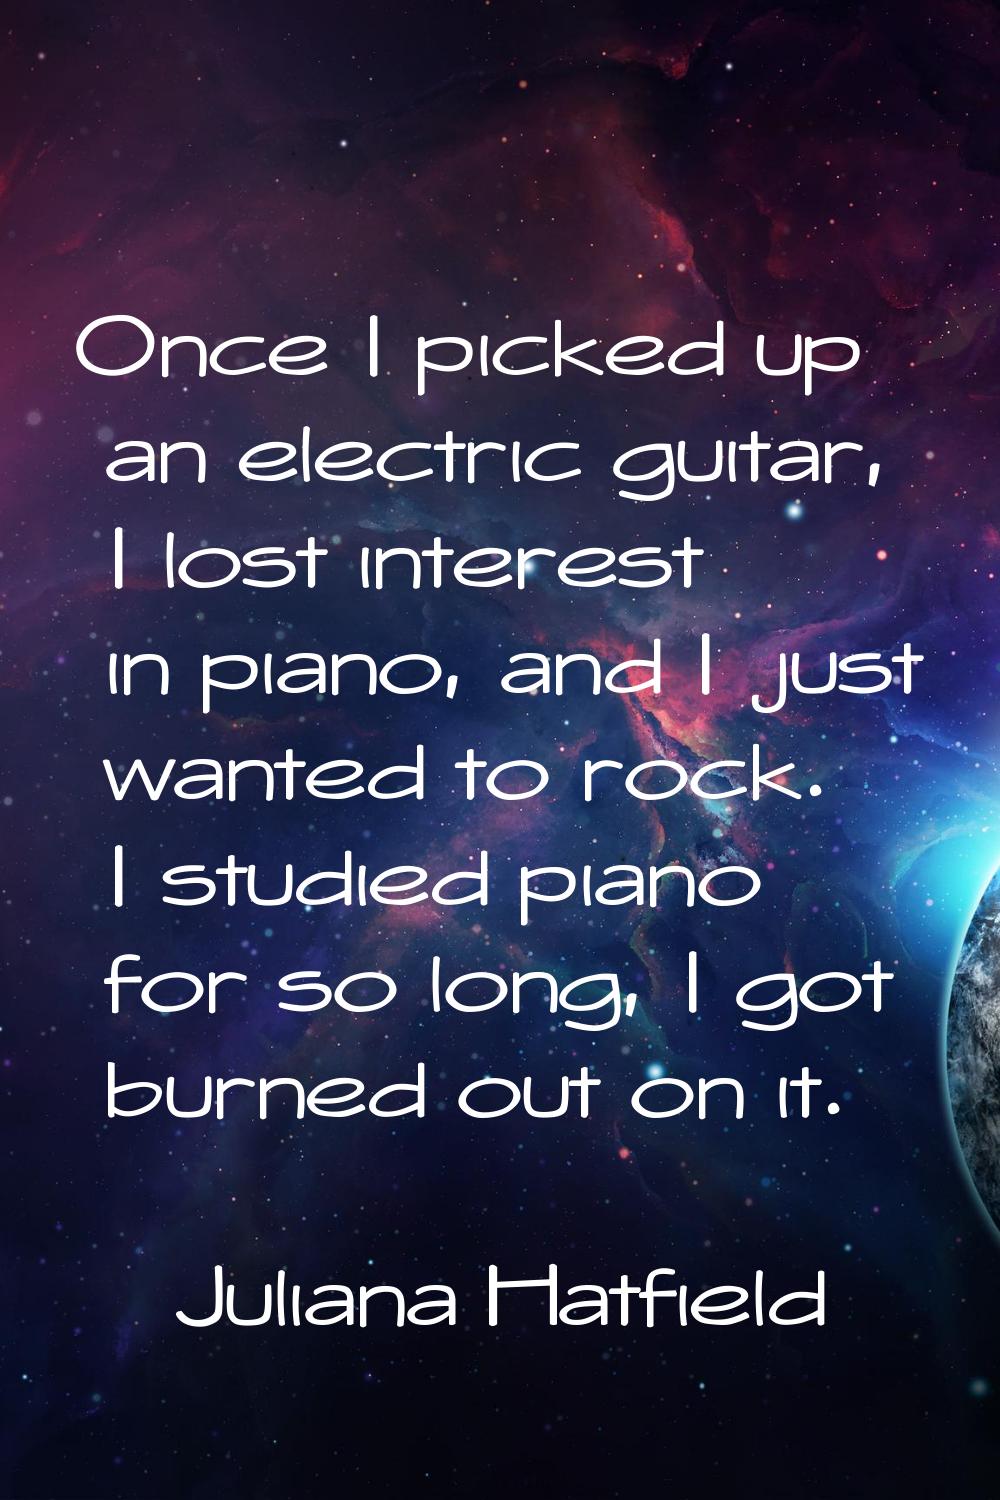 Once I picked up an electric guitar, I lost interest in piano, and I just wanted to rock. I studied